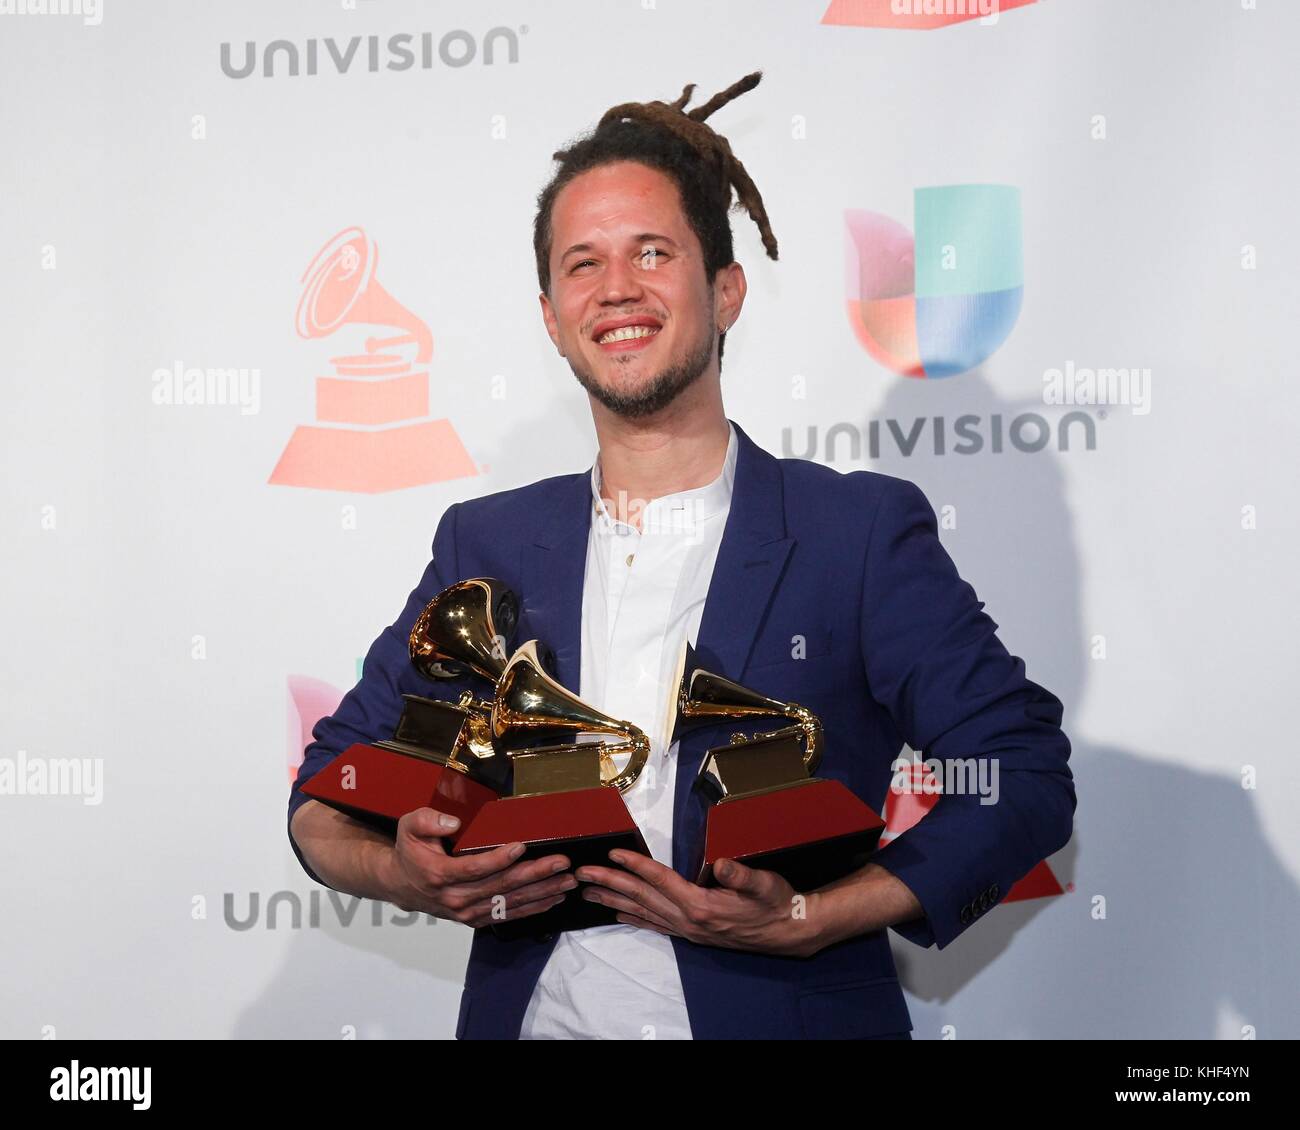 Las Vegas, NV, USA. 16th Nov, 2017. Vicente Garcia, Best New Artist, Best Singer-Songwriter Album (A La Mar) and Best Tropical Song (Bachata En Kingston) in the press room for 18th Annual Latin Grammy Awards Show - Press Room, MGM Grand Garden Arena, Las Vegas, NV November 16, 2017. Credit: JA/Everett Collection/Alamy Live News Stock Photo